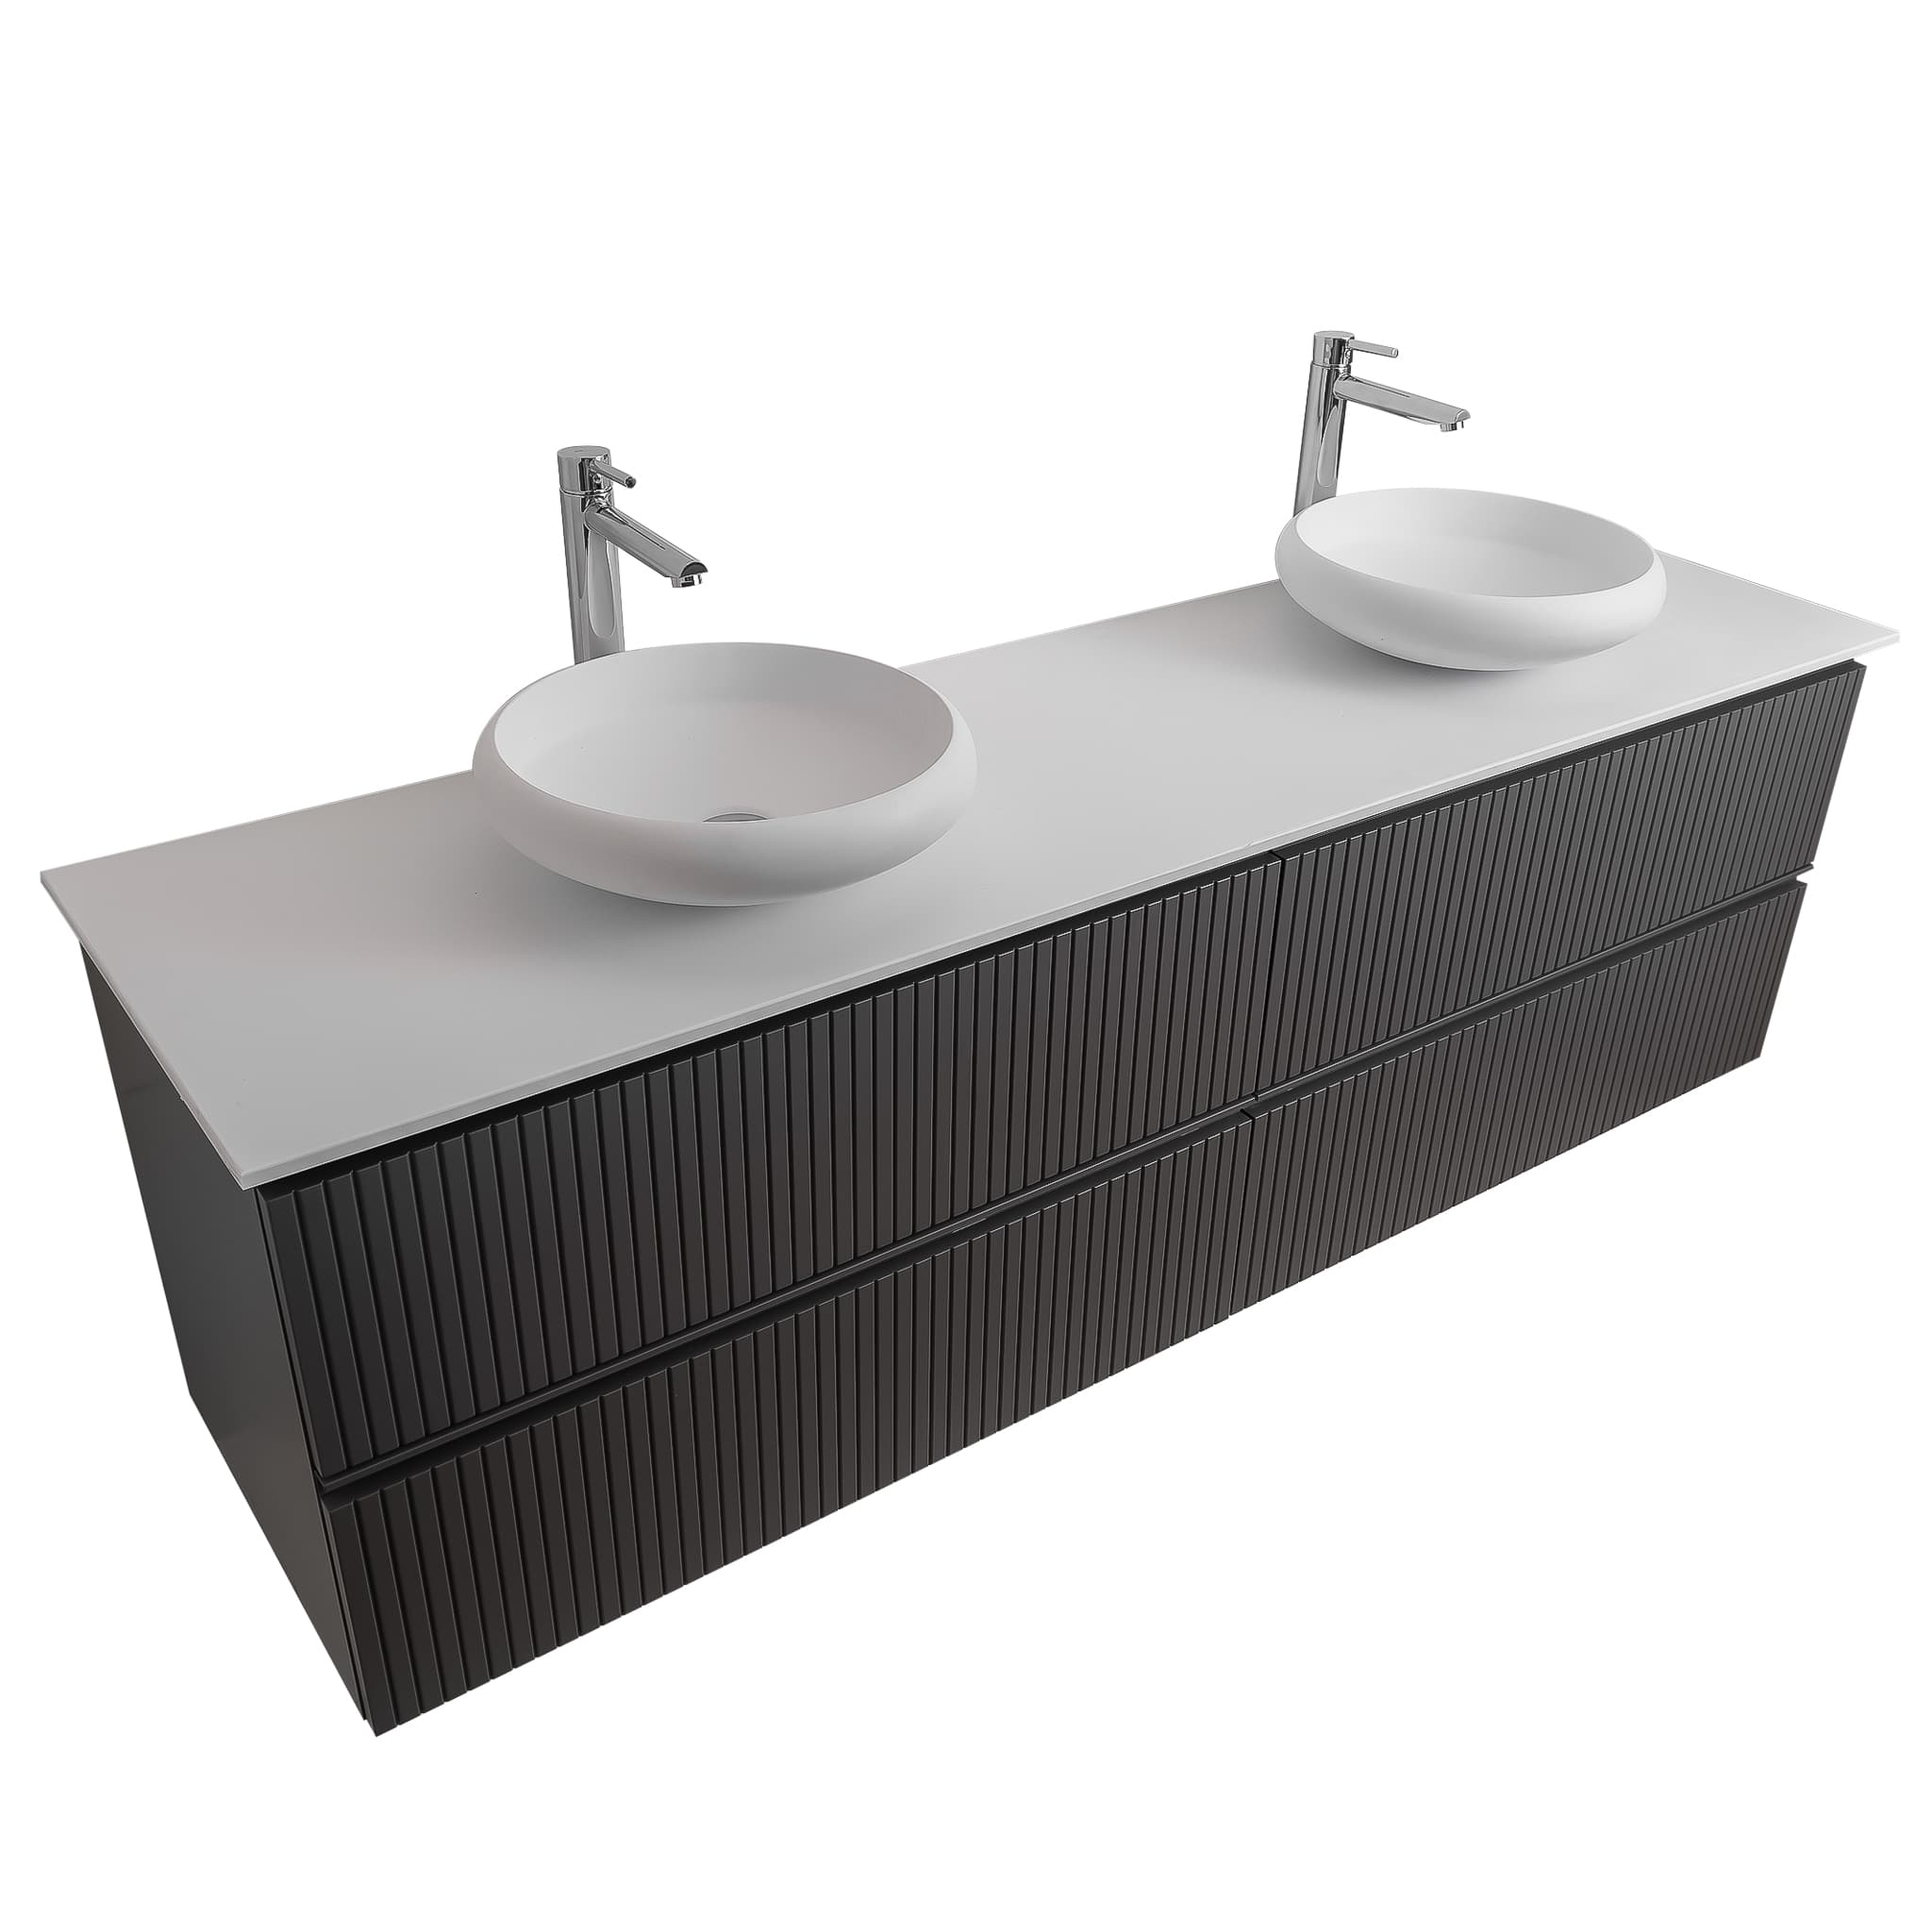 Ares 63 Matte Grey Cabinet, Solid Surface Flat White Counter And Two Round Solid Surface White Basin 1153, Wall Mounted Modern Vanity Set